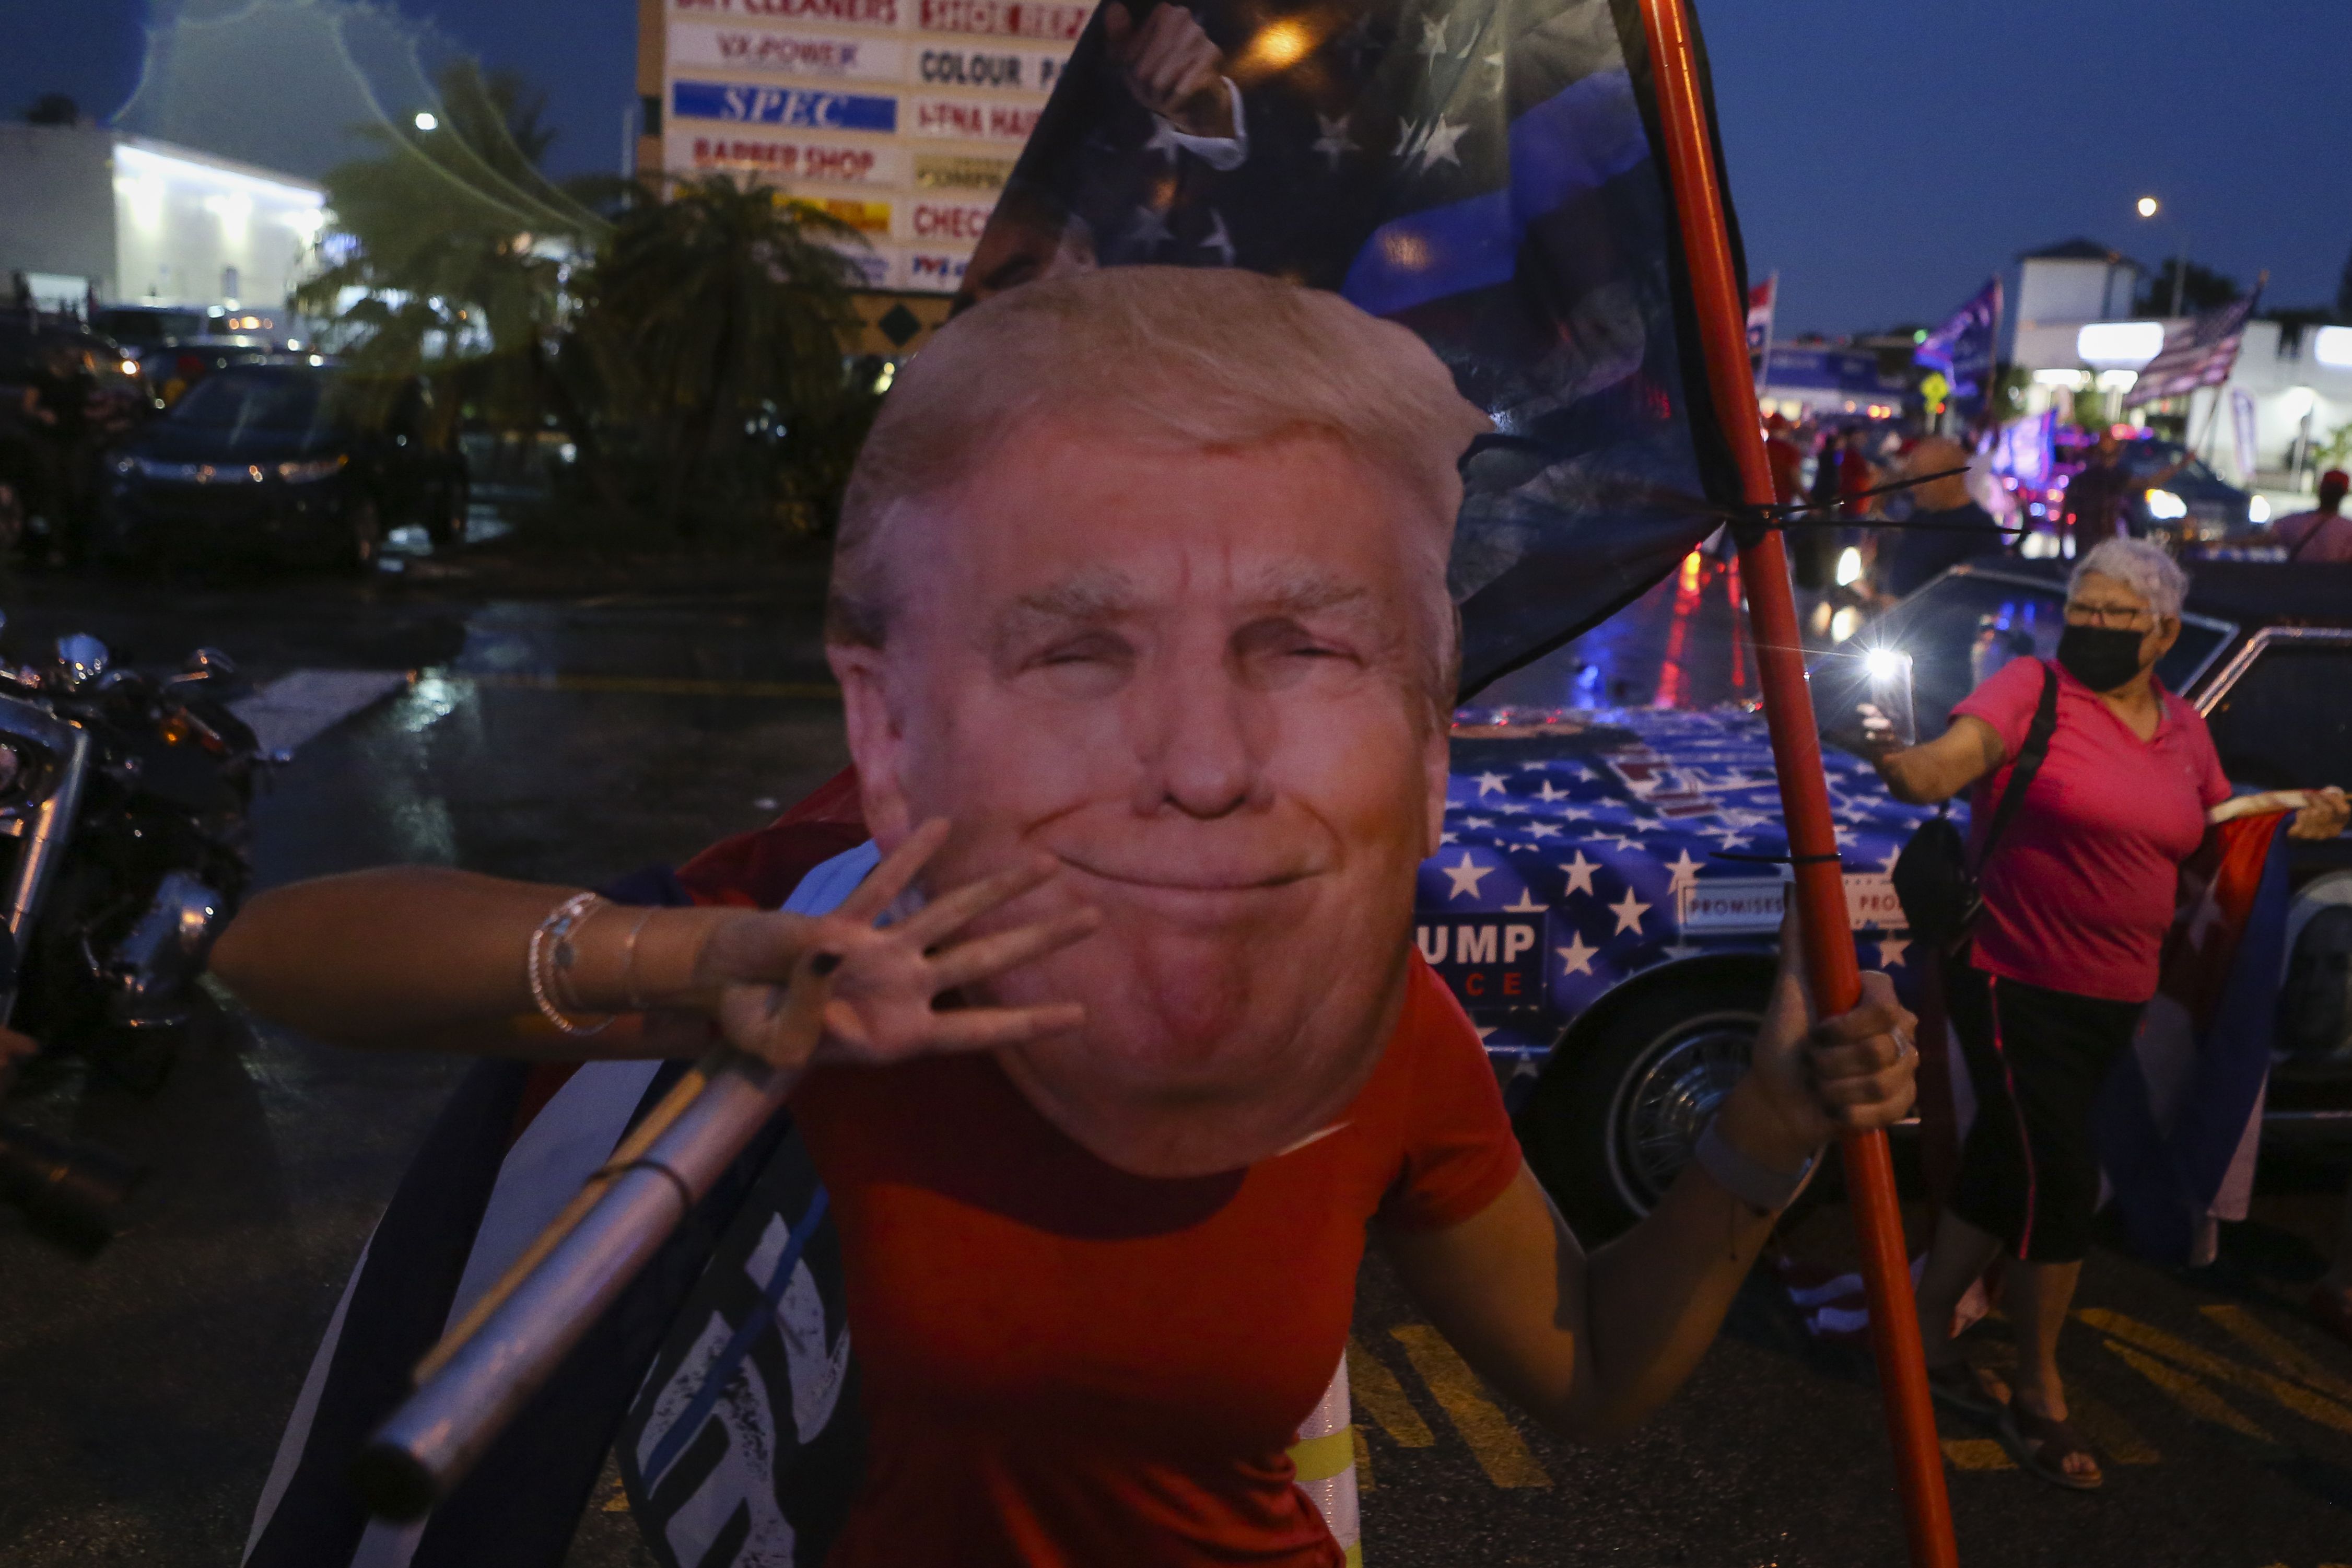 Supporters of the Republican party gather to support U.S. President Donald Trump in Miami, Florida, United States on November 7